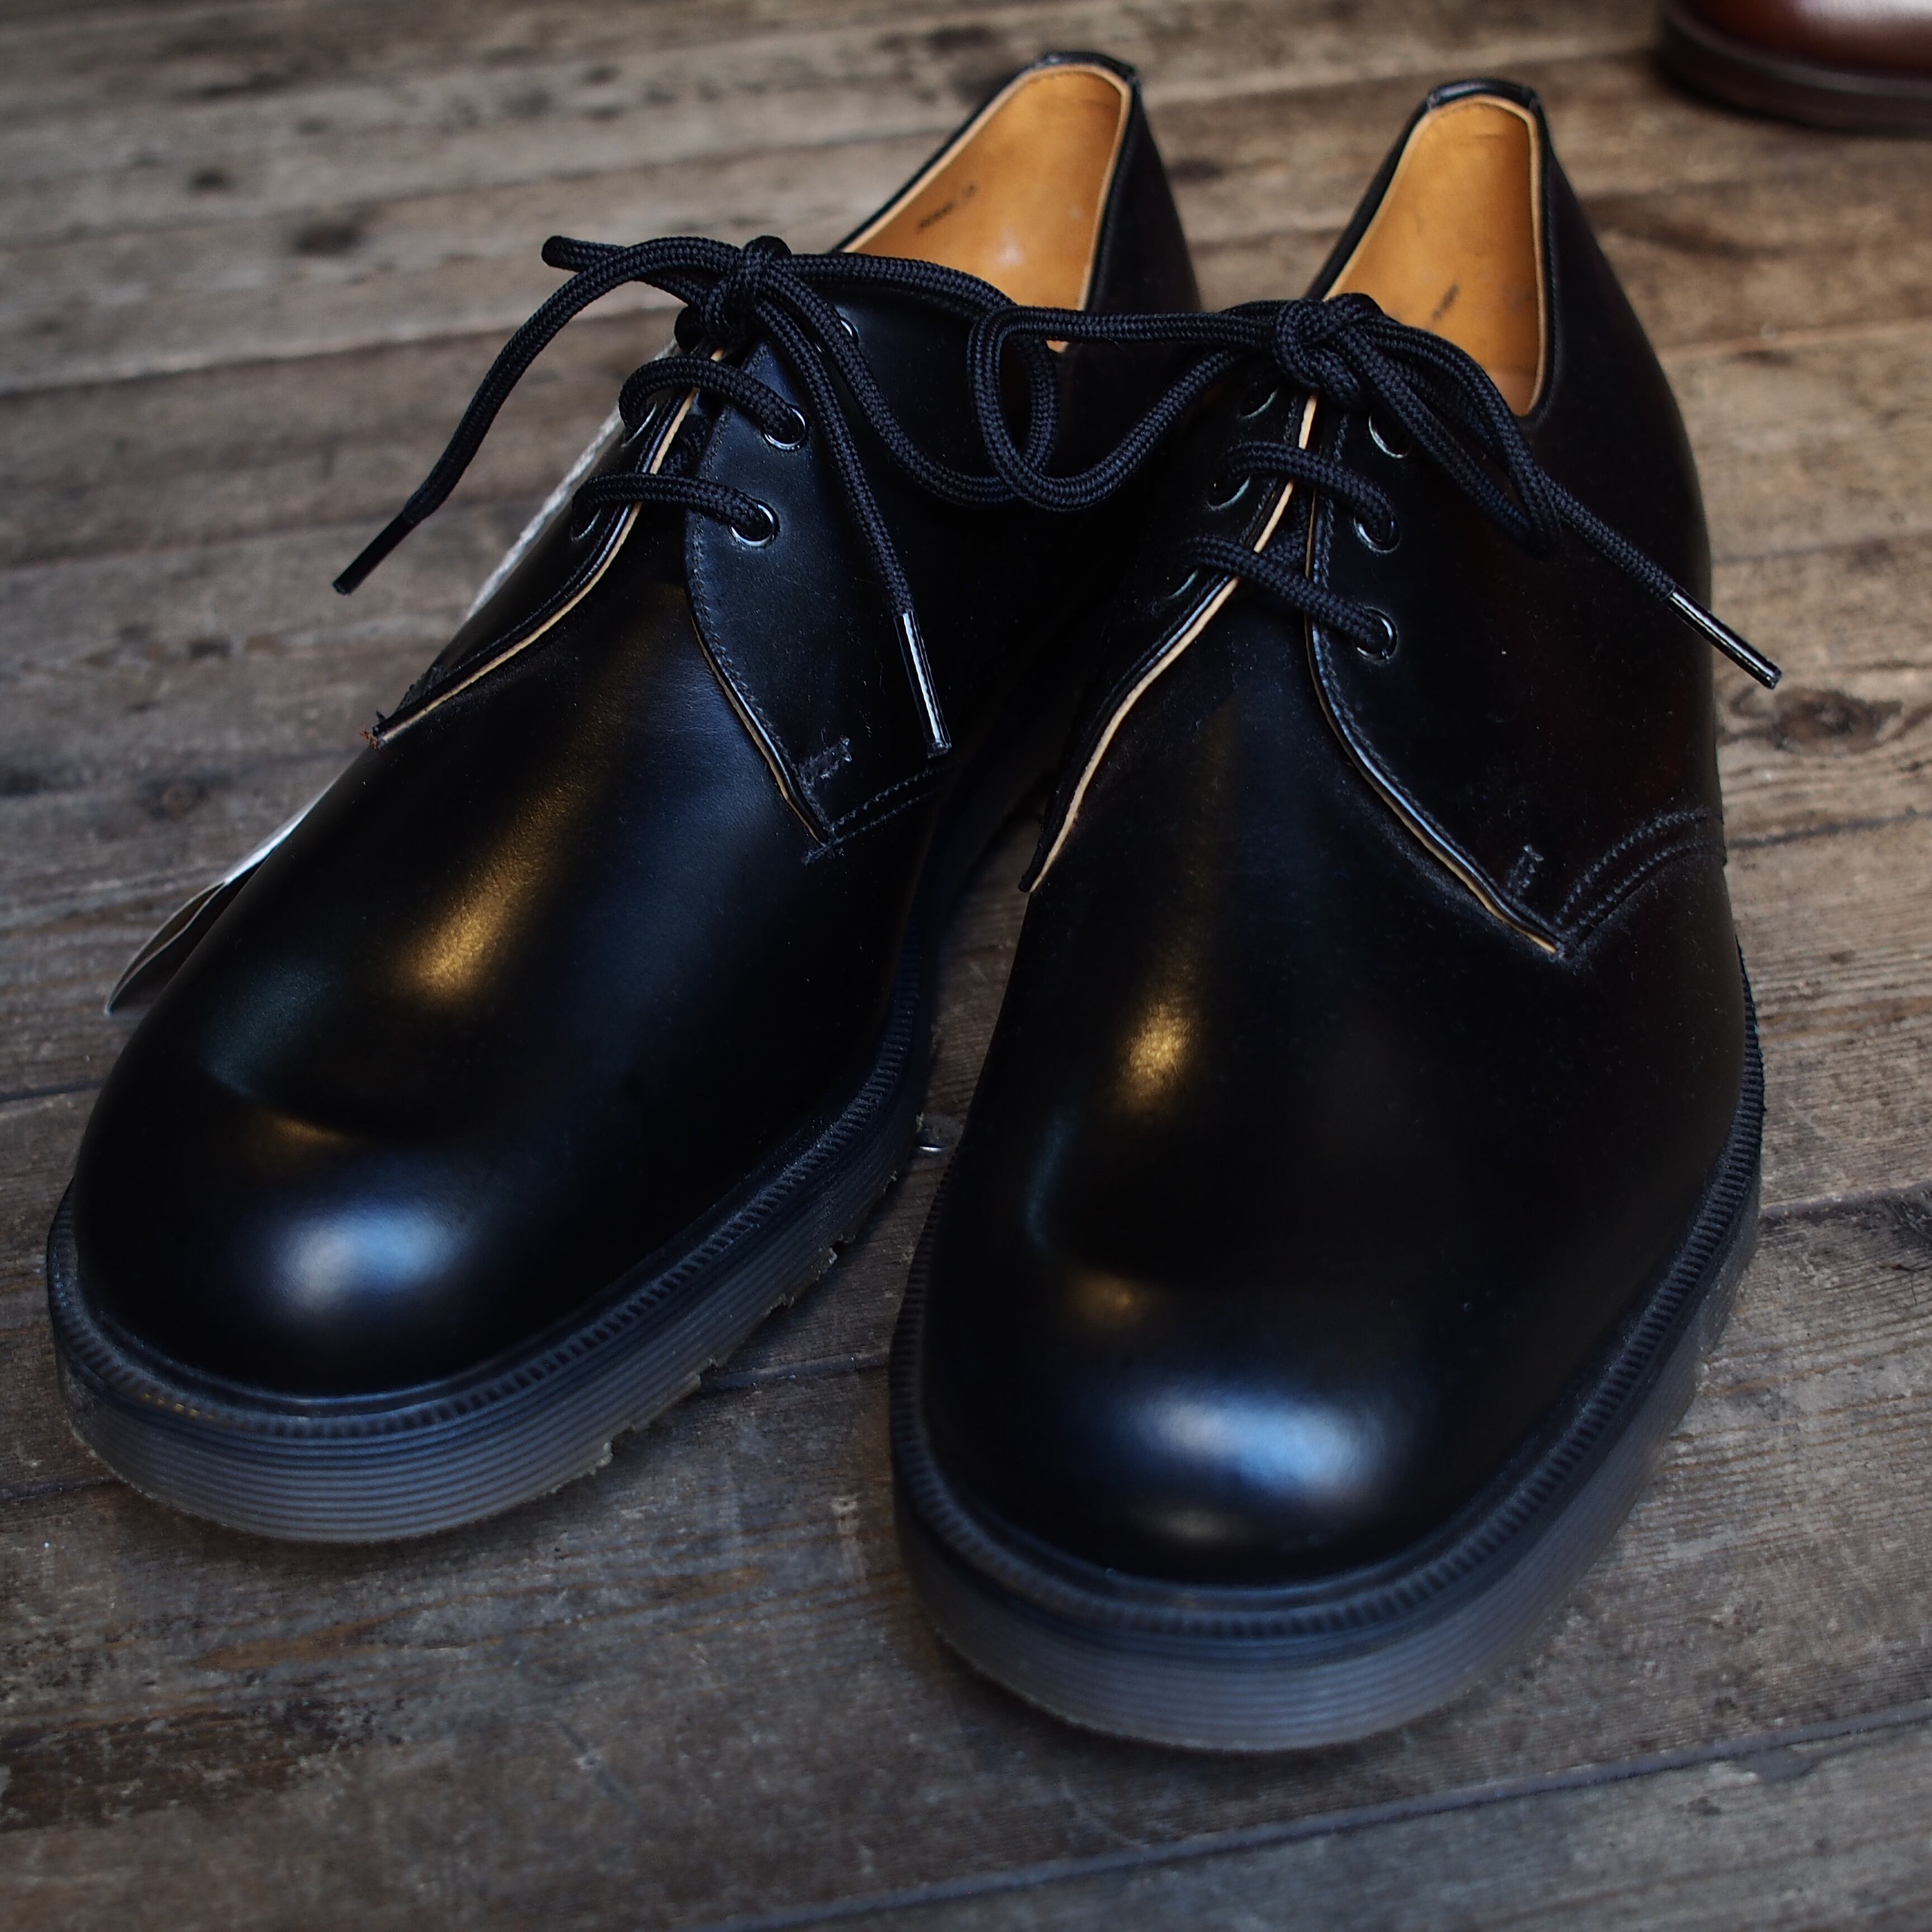 Special! Dead Stock UK 1980’s Dr. Martens 3 Tie Shoes UK9 イングランド製